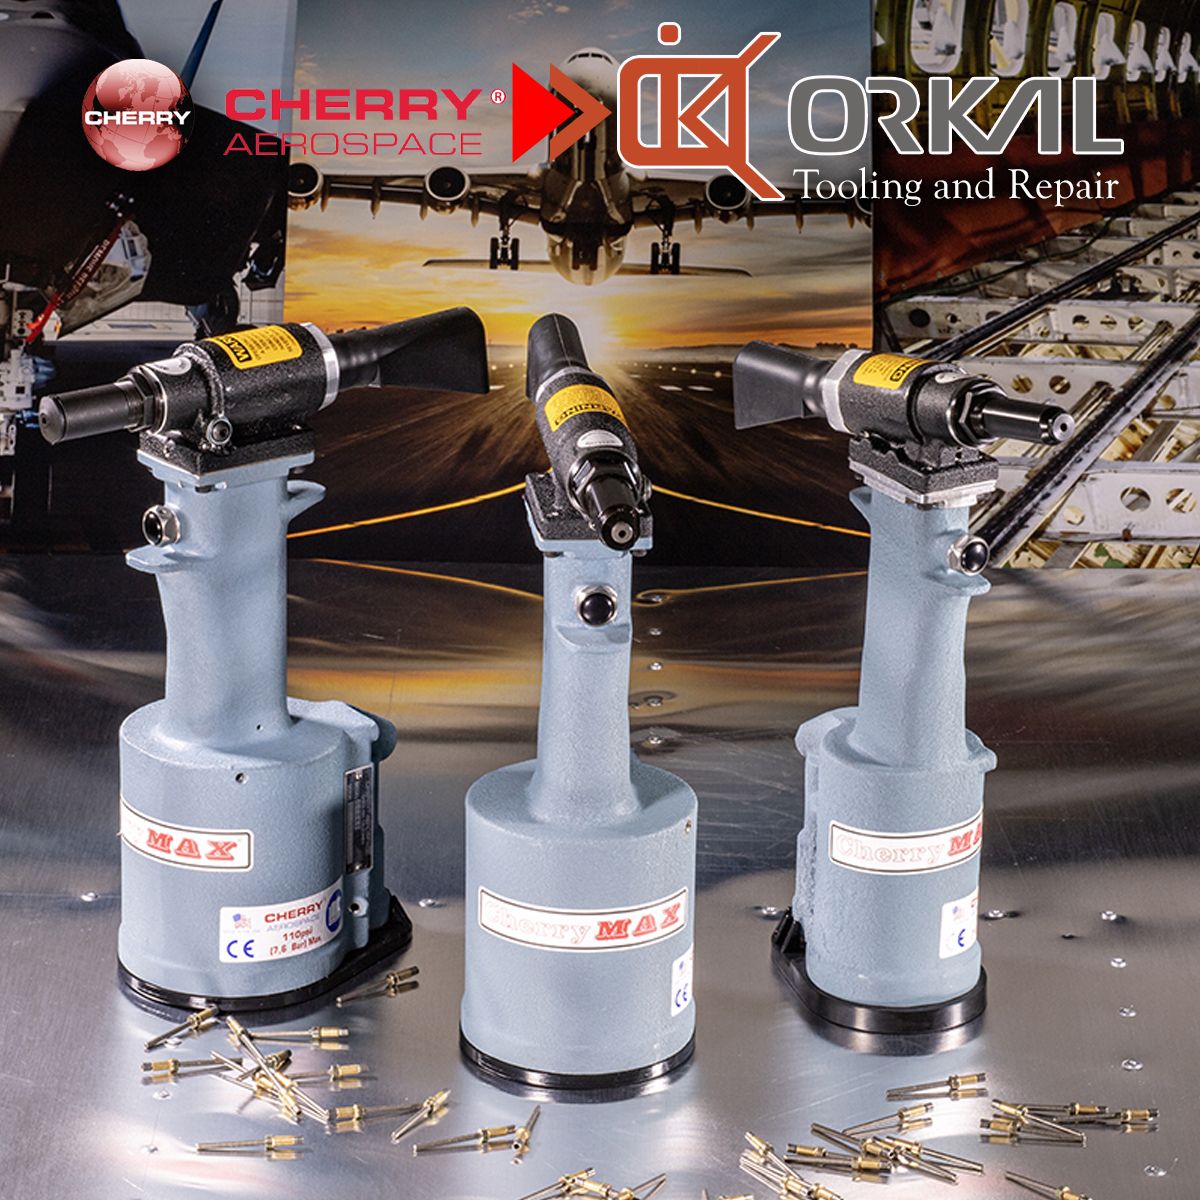 orkal, 1. orkal's pneumatic rivet guns are optimized for aerospace assembly solutions, ensuring aircraft-grade quality and efficiency.
2. crafted by cherry aerospace, these rivet guns offer impeccable repair and tooling capabilities in aviation settings.
3. orkal's branded rivet guns evidence resilient supply chain management within fluid transfer system landscapes.
4. these rivet guns display orkal's commitment to compliance and precision in developing high-quality aerospace hardware.
5. beyond tool manufacturing, orkal industries also provides dependable logistics support for smooth operations in the sky.